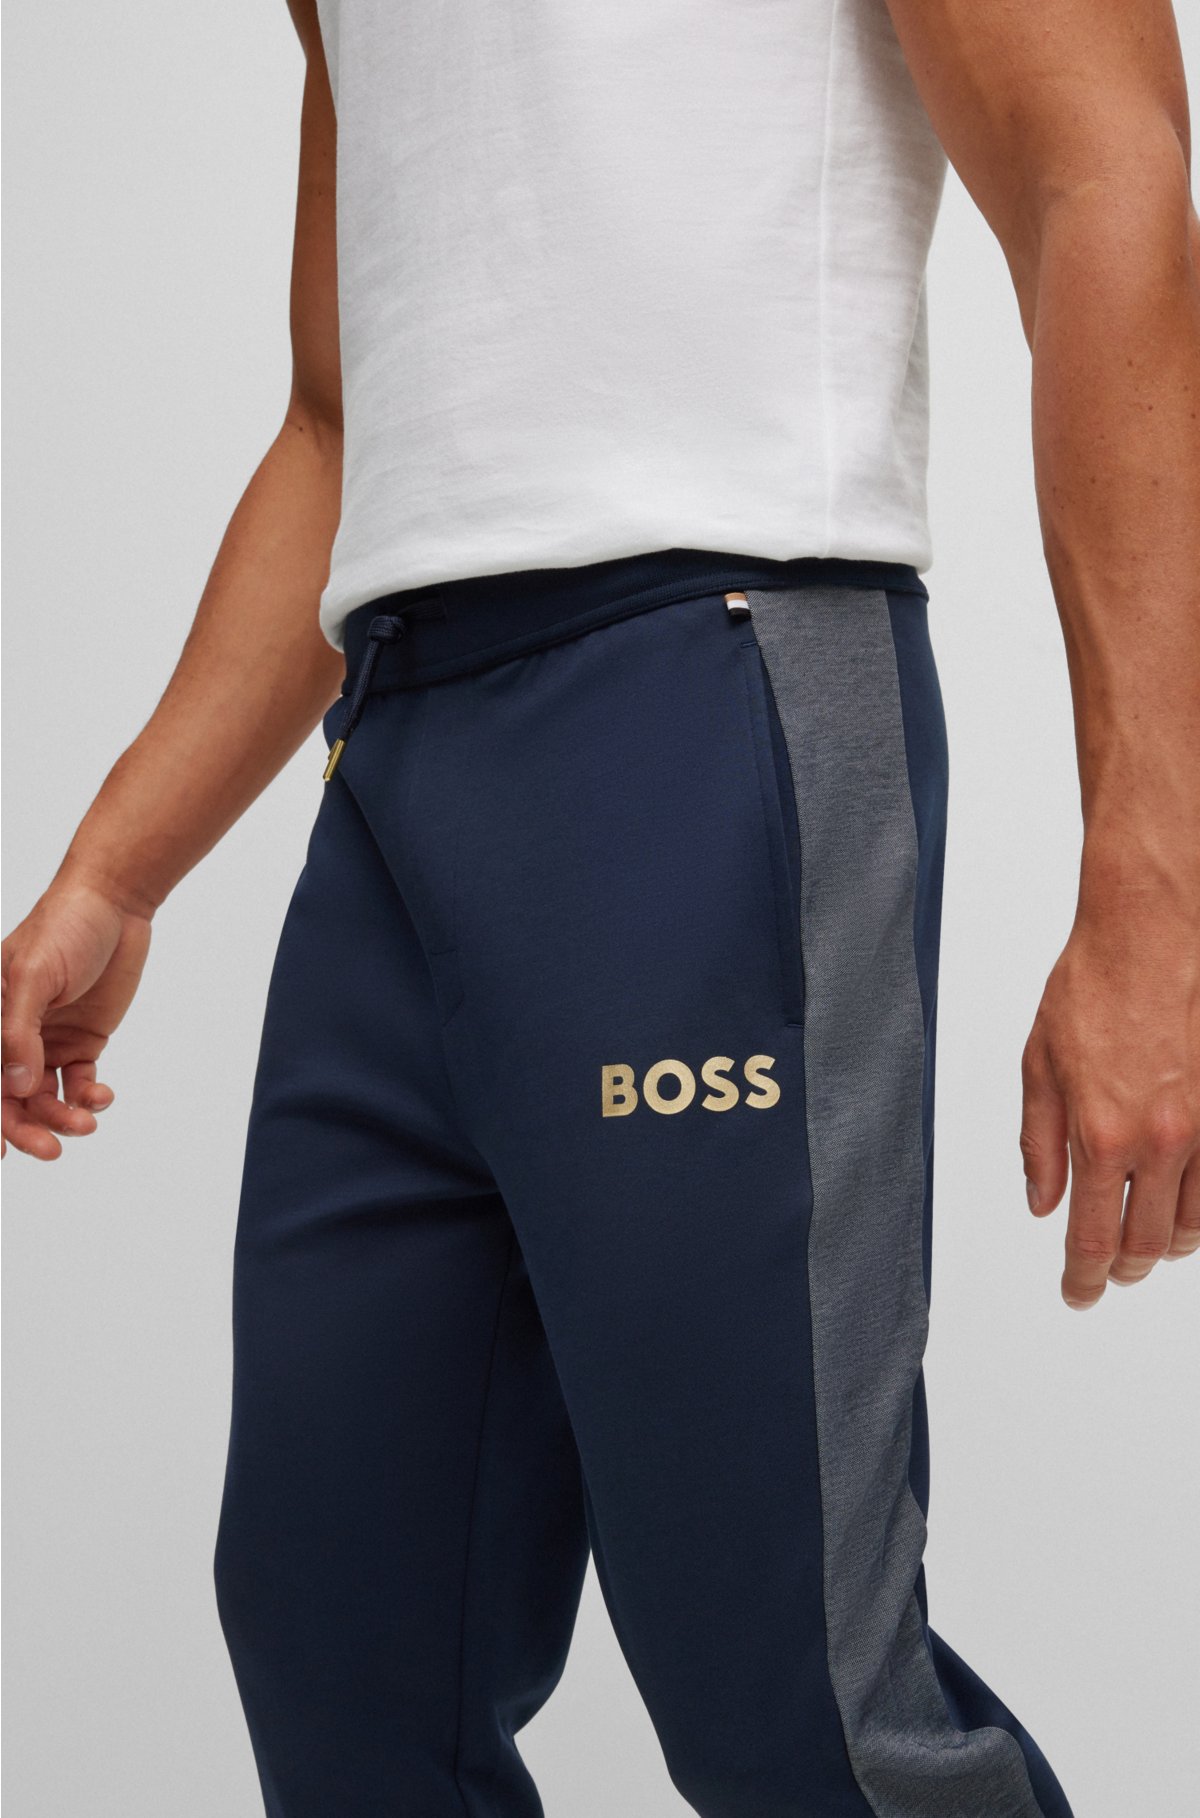 embroidered logo with Sweatpants BOSS -